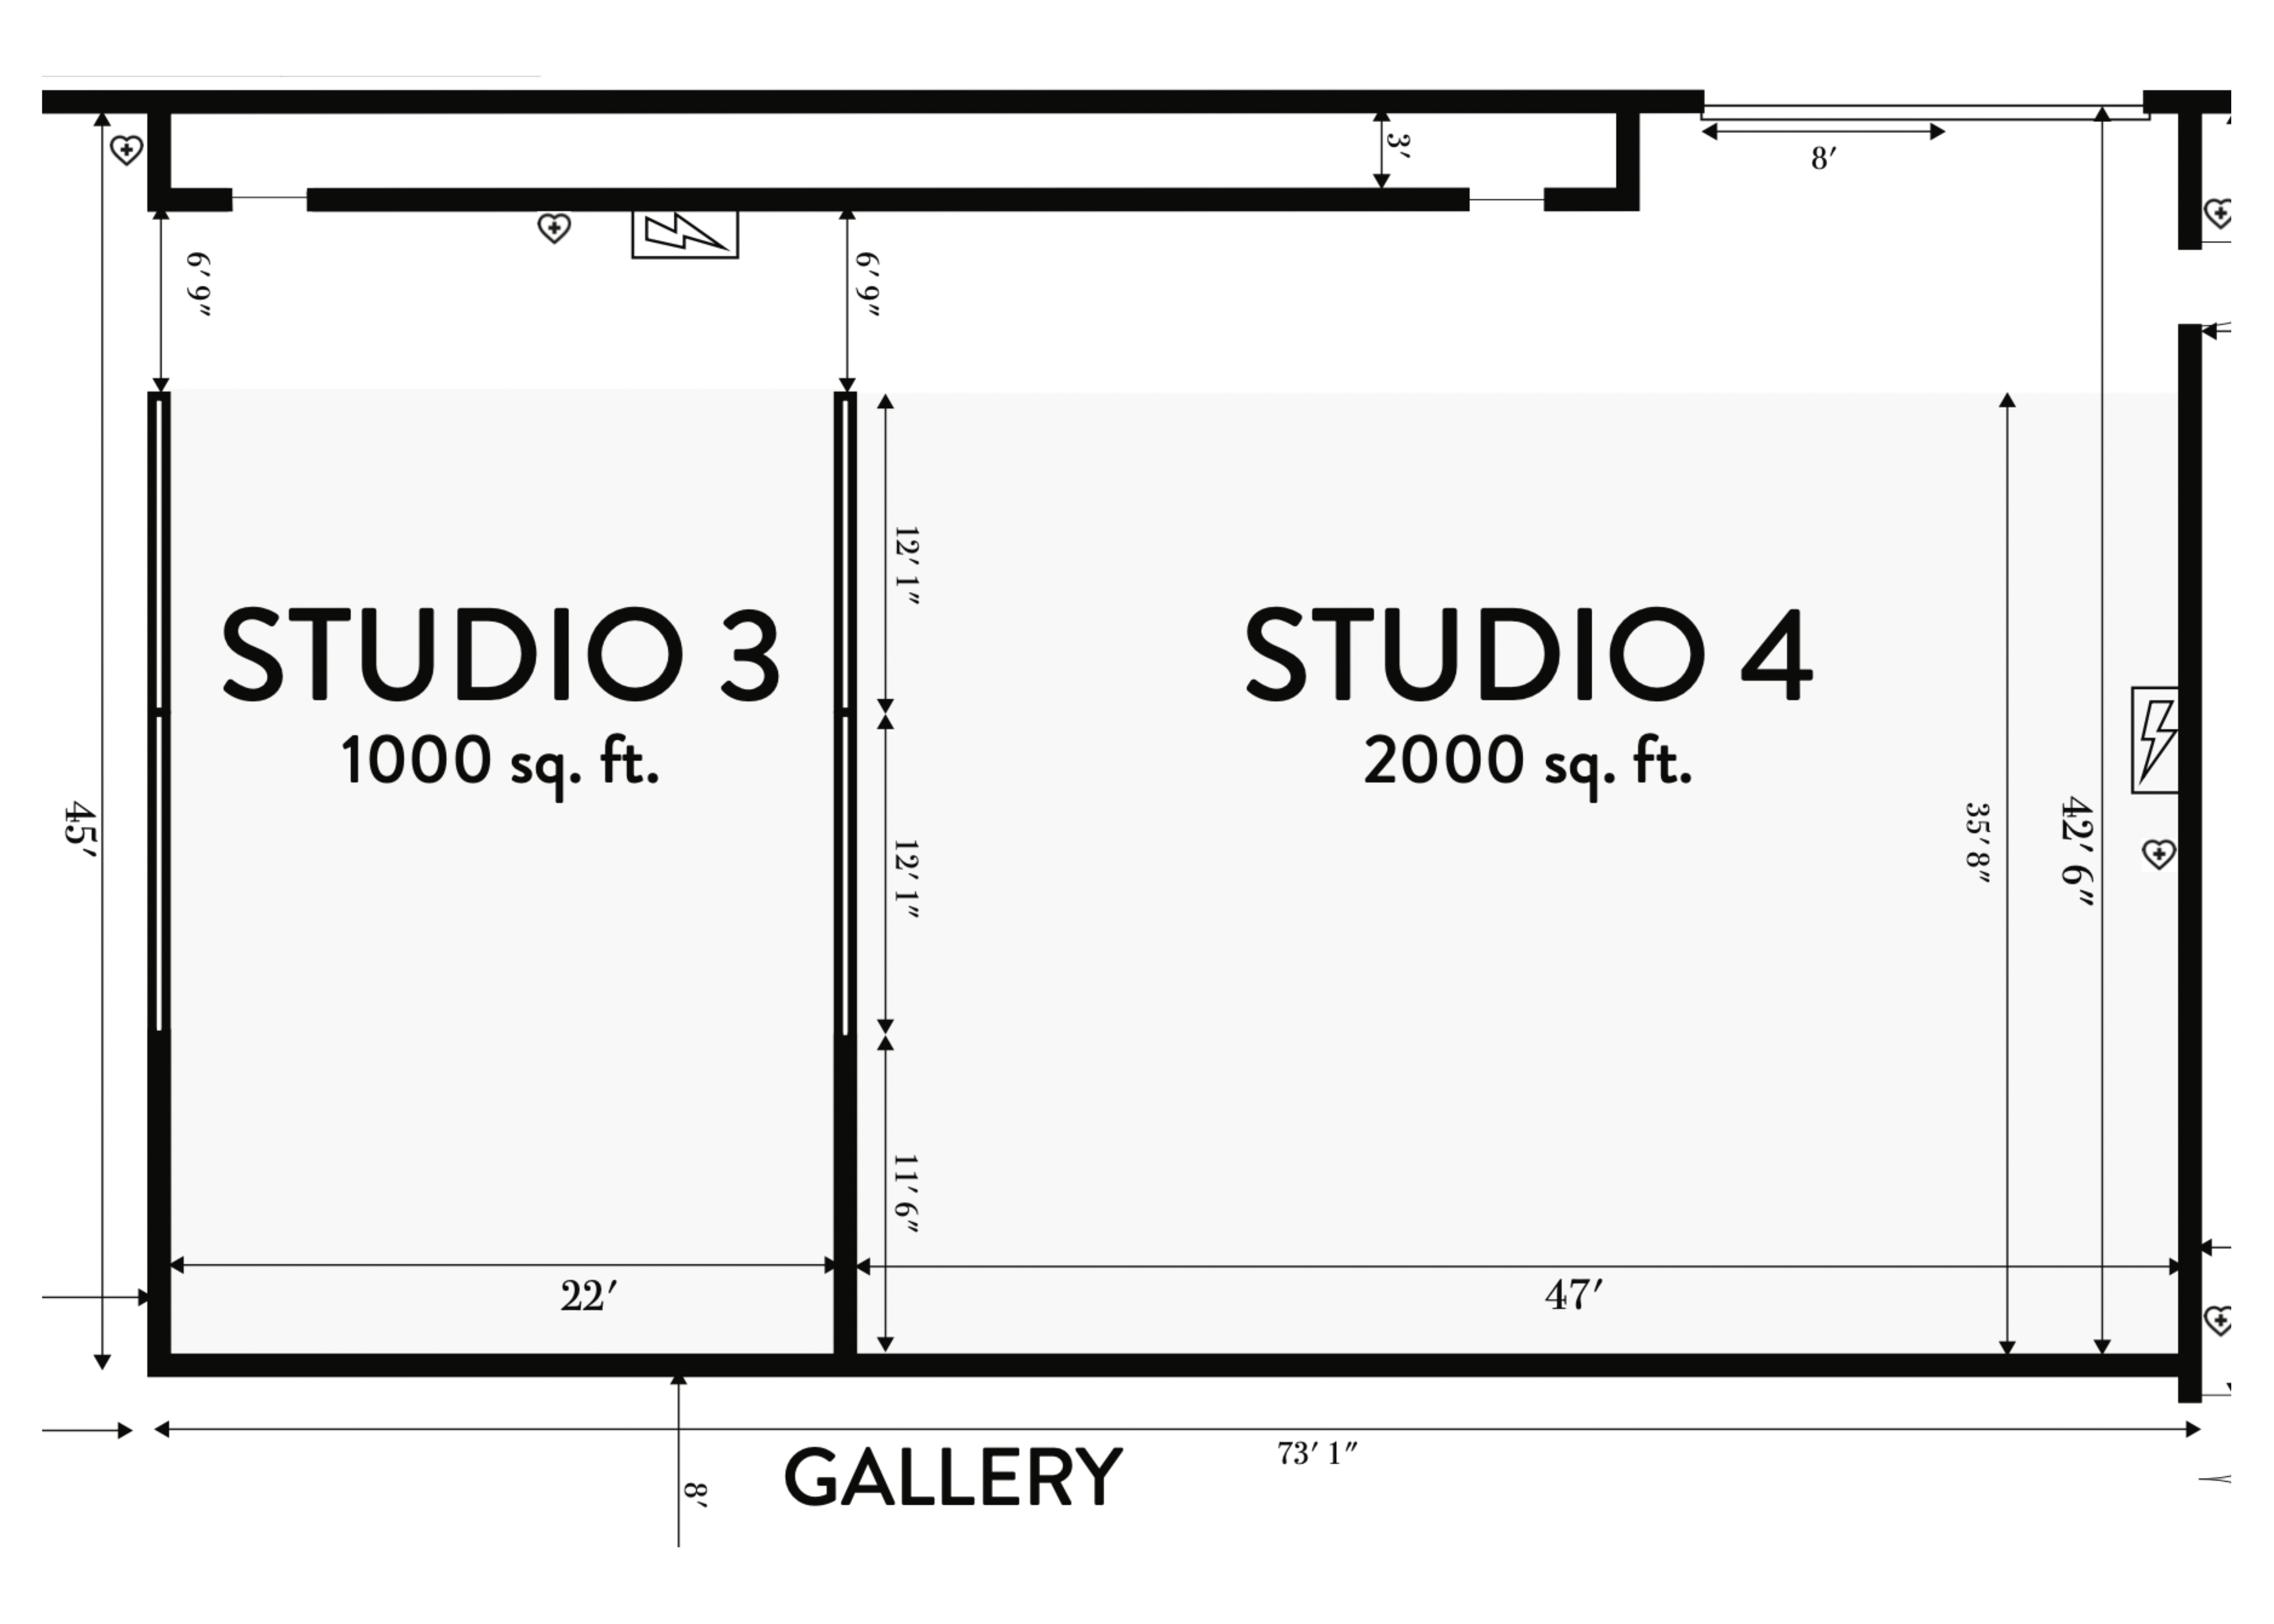 A black and white floor plan that shows direct access between Studio 3 and the 2000 square feet of space in Studio 4. This multimedia studio space is also surrounded by a gallery.